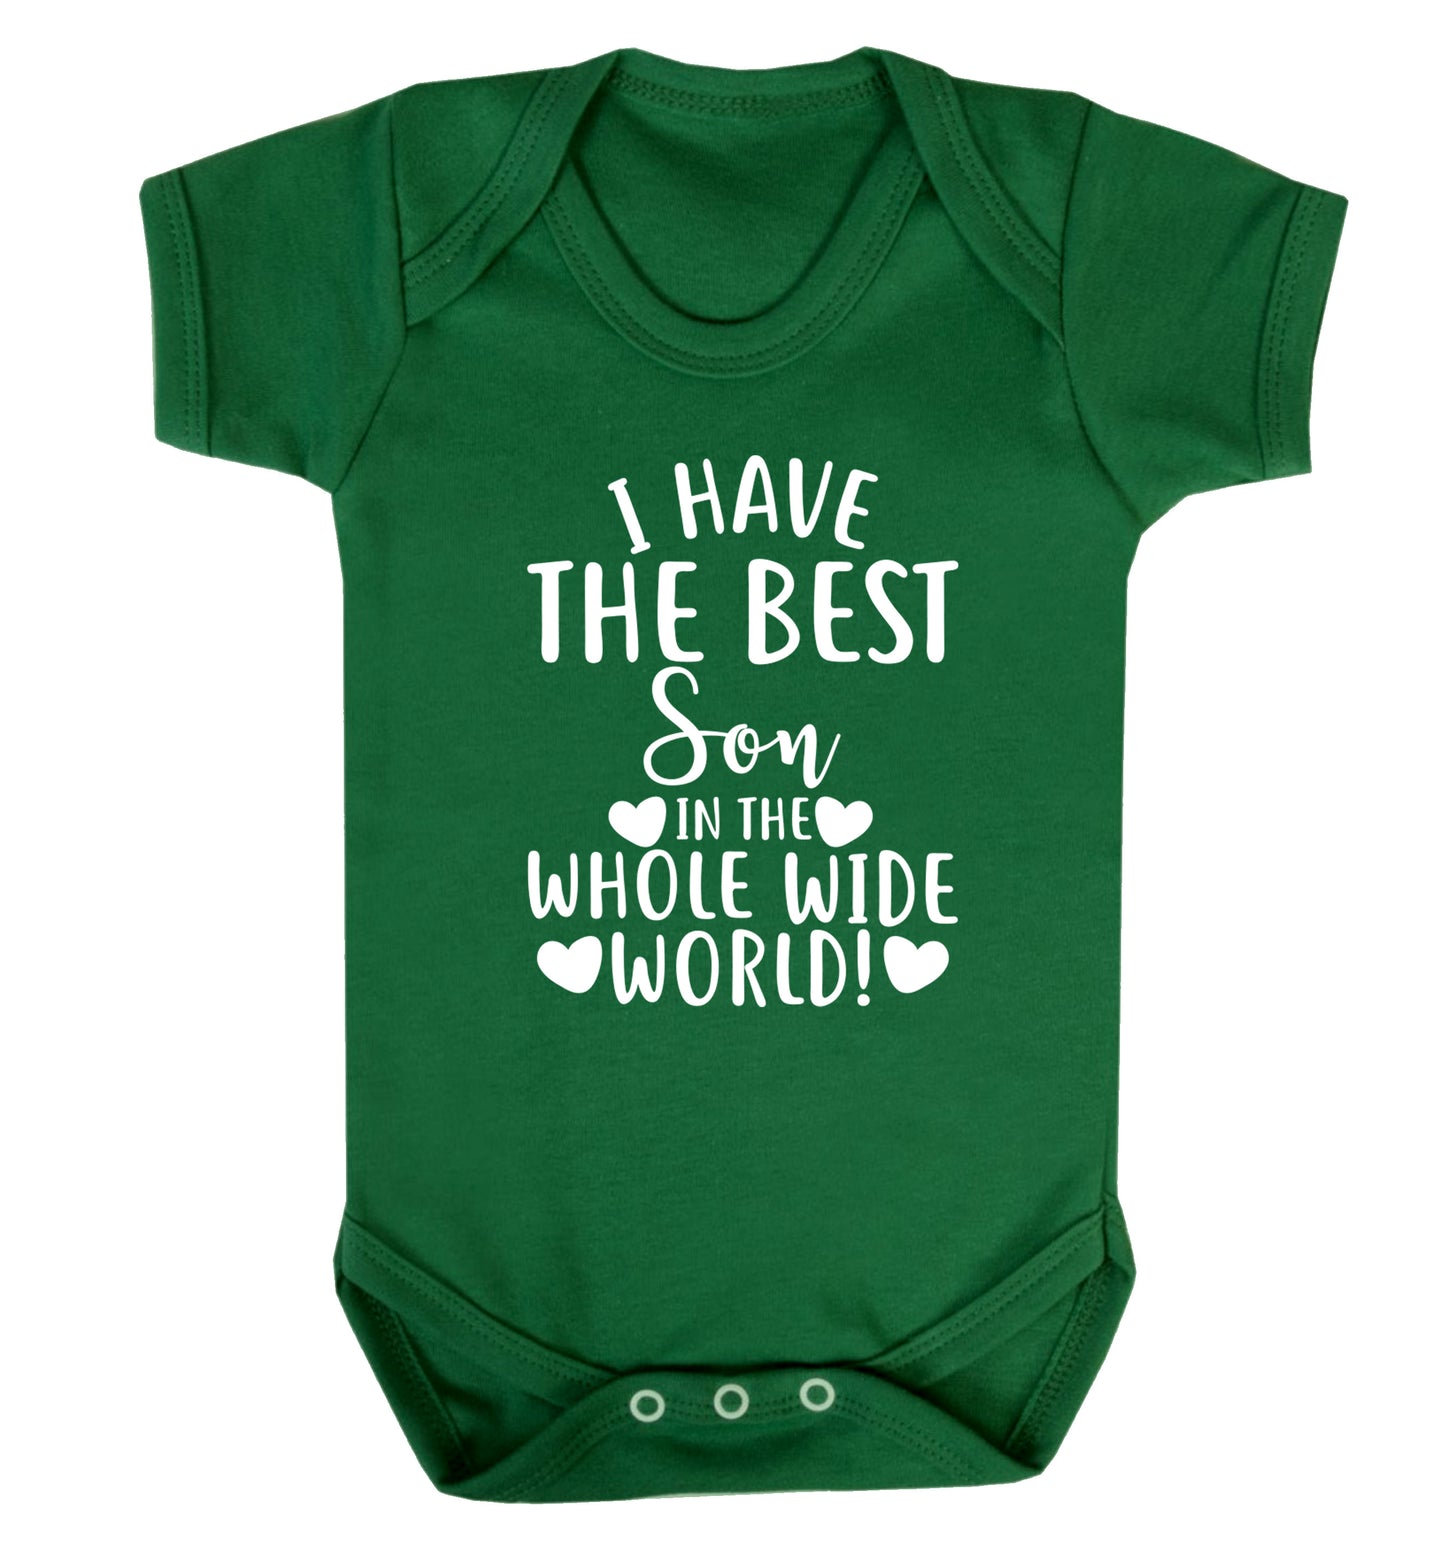 I have the best son in the whole wide world! Baby Vest green 18-24 months